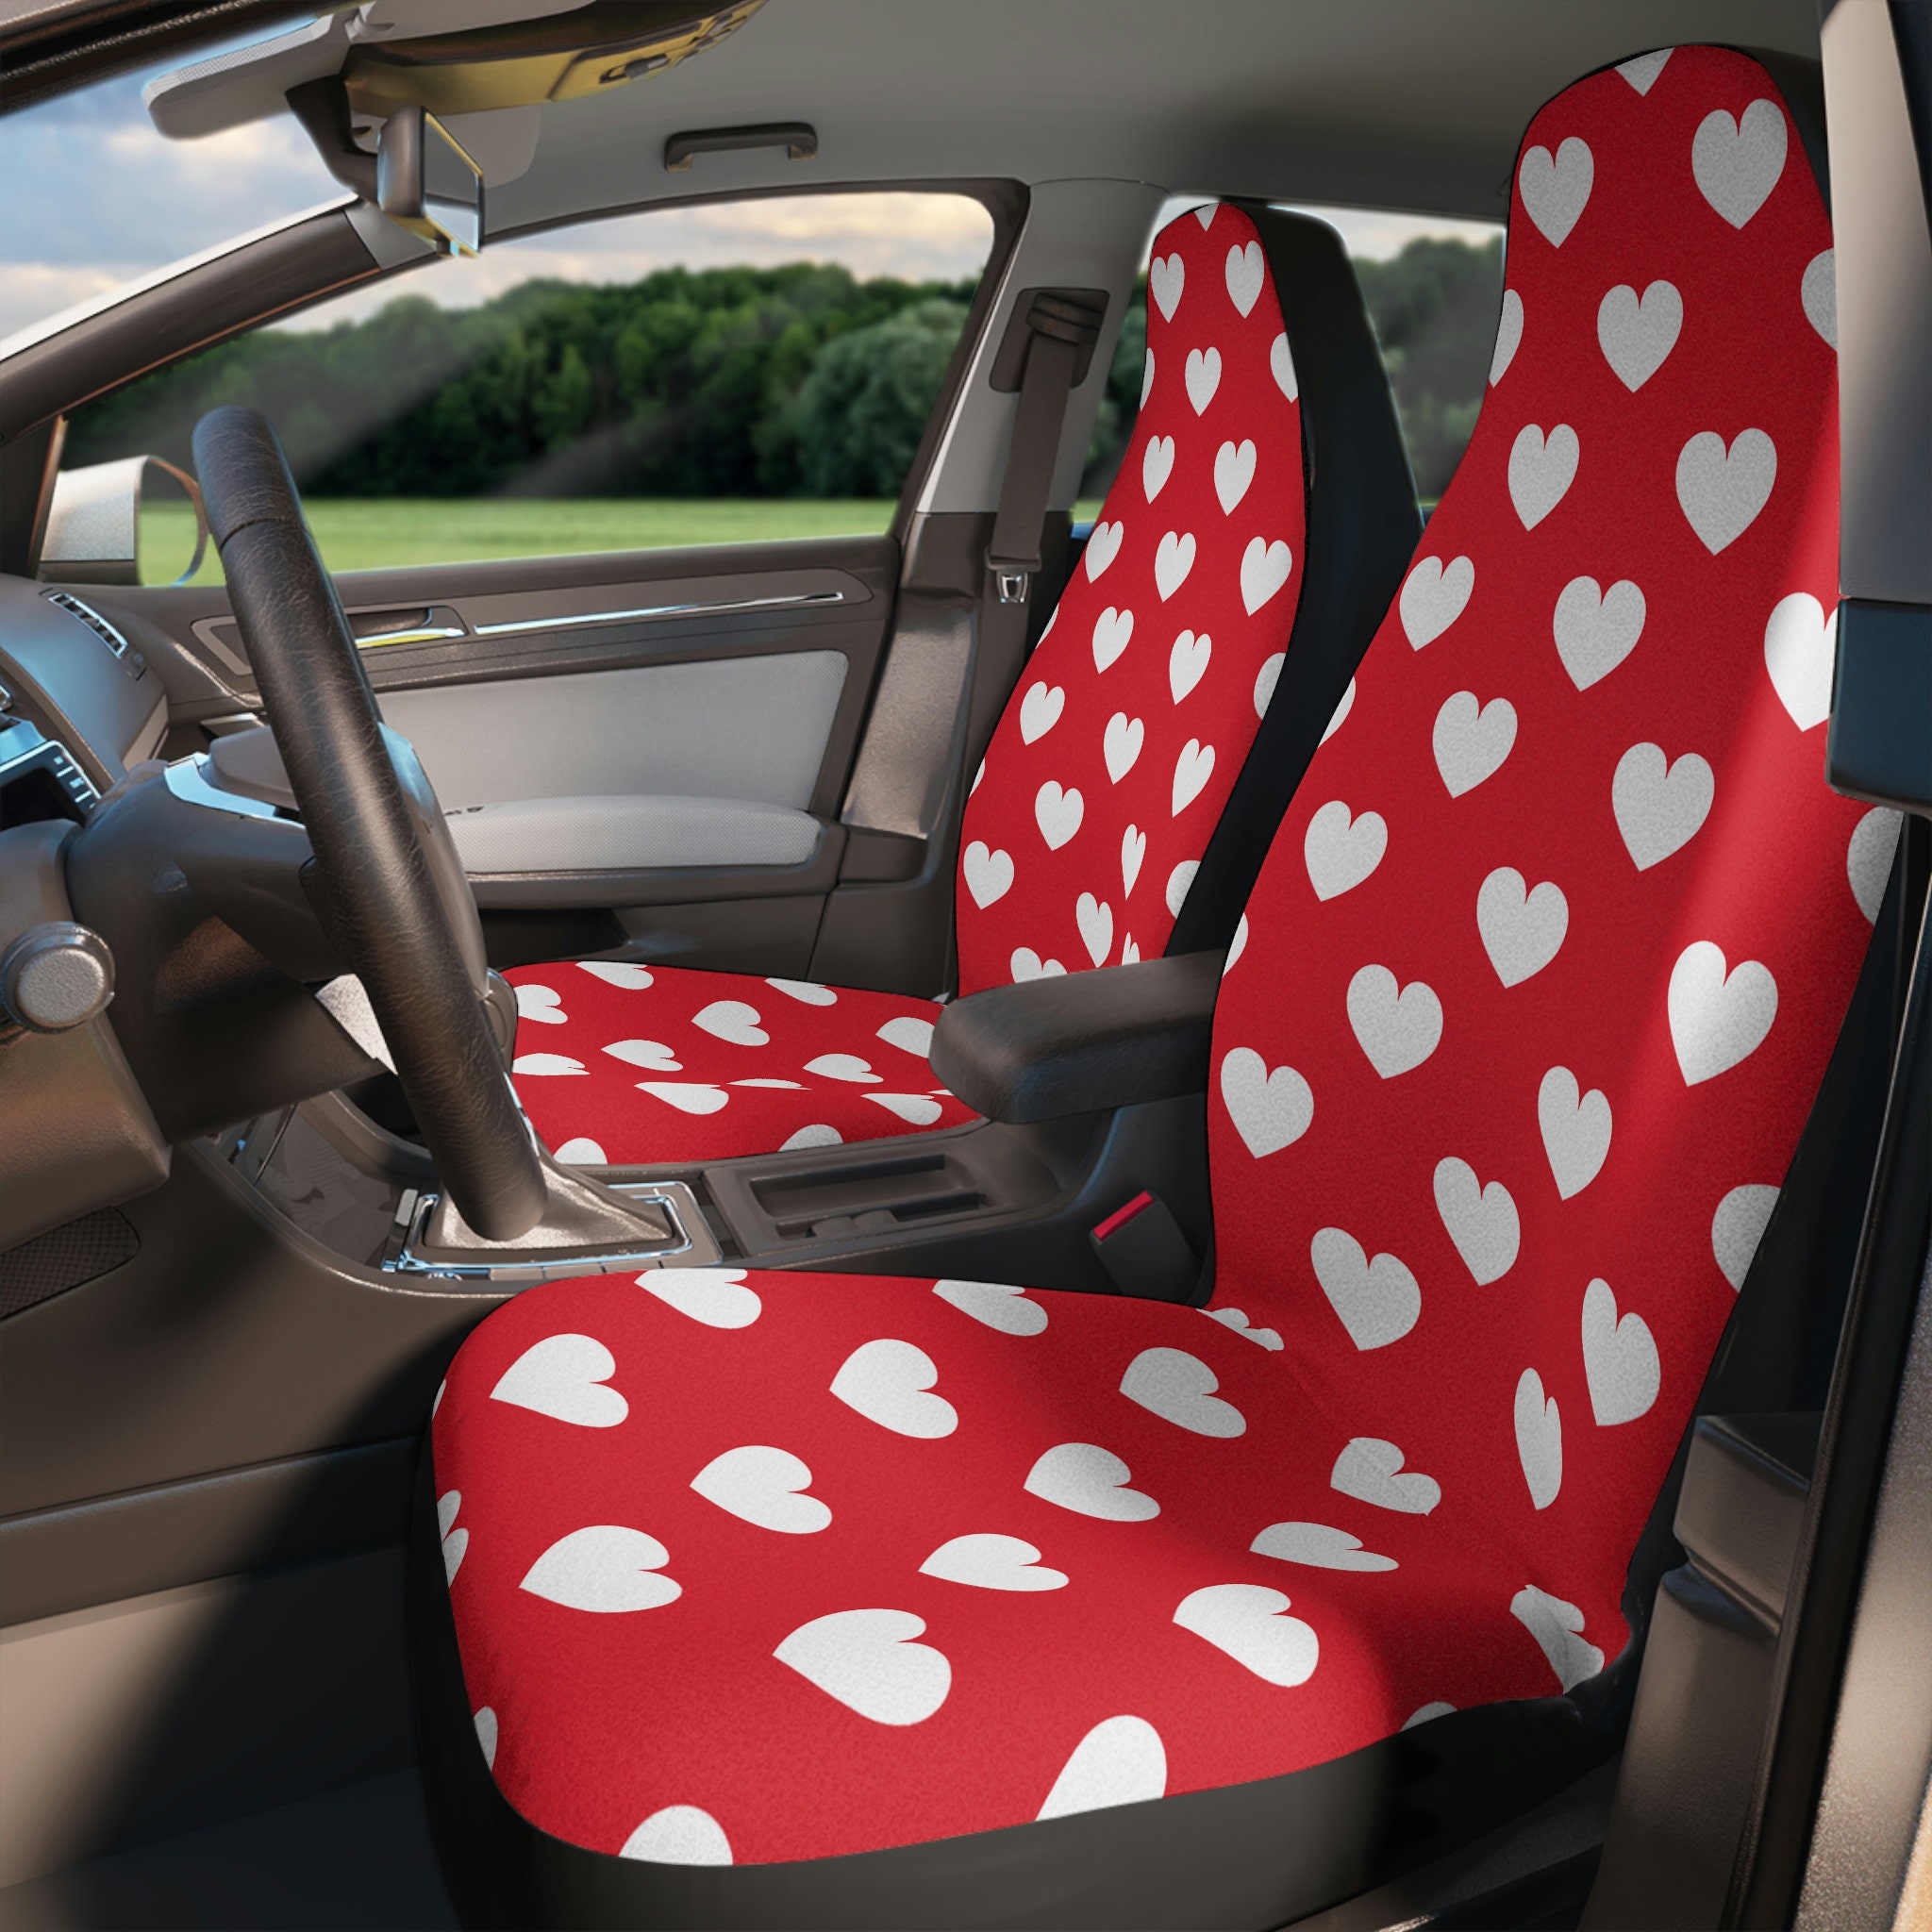 Discover Red Hearts Car Seat Covers | Kawaii Pink Heats Car Accessories | Valentines Pink Car Seat Covers